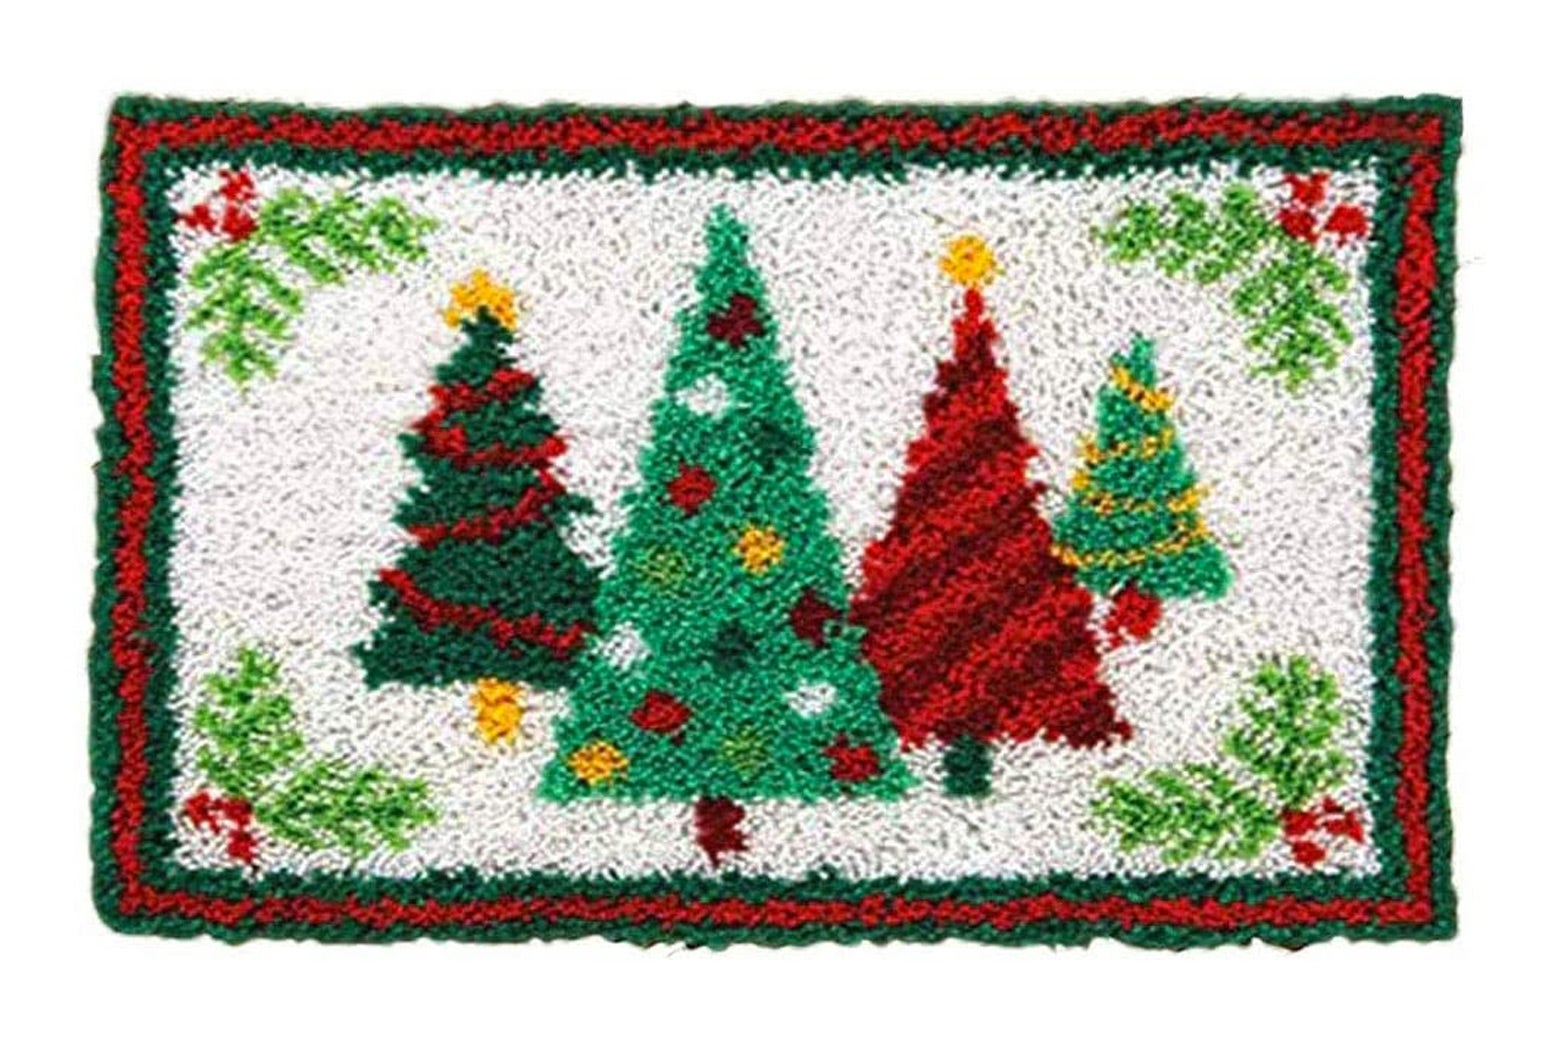 A rug with Christmas trees on it.